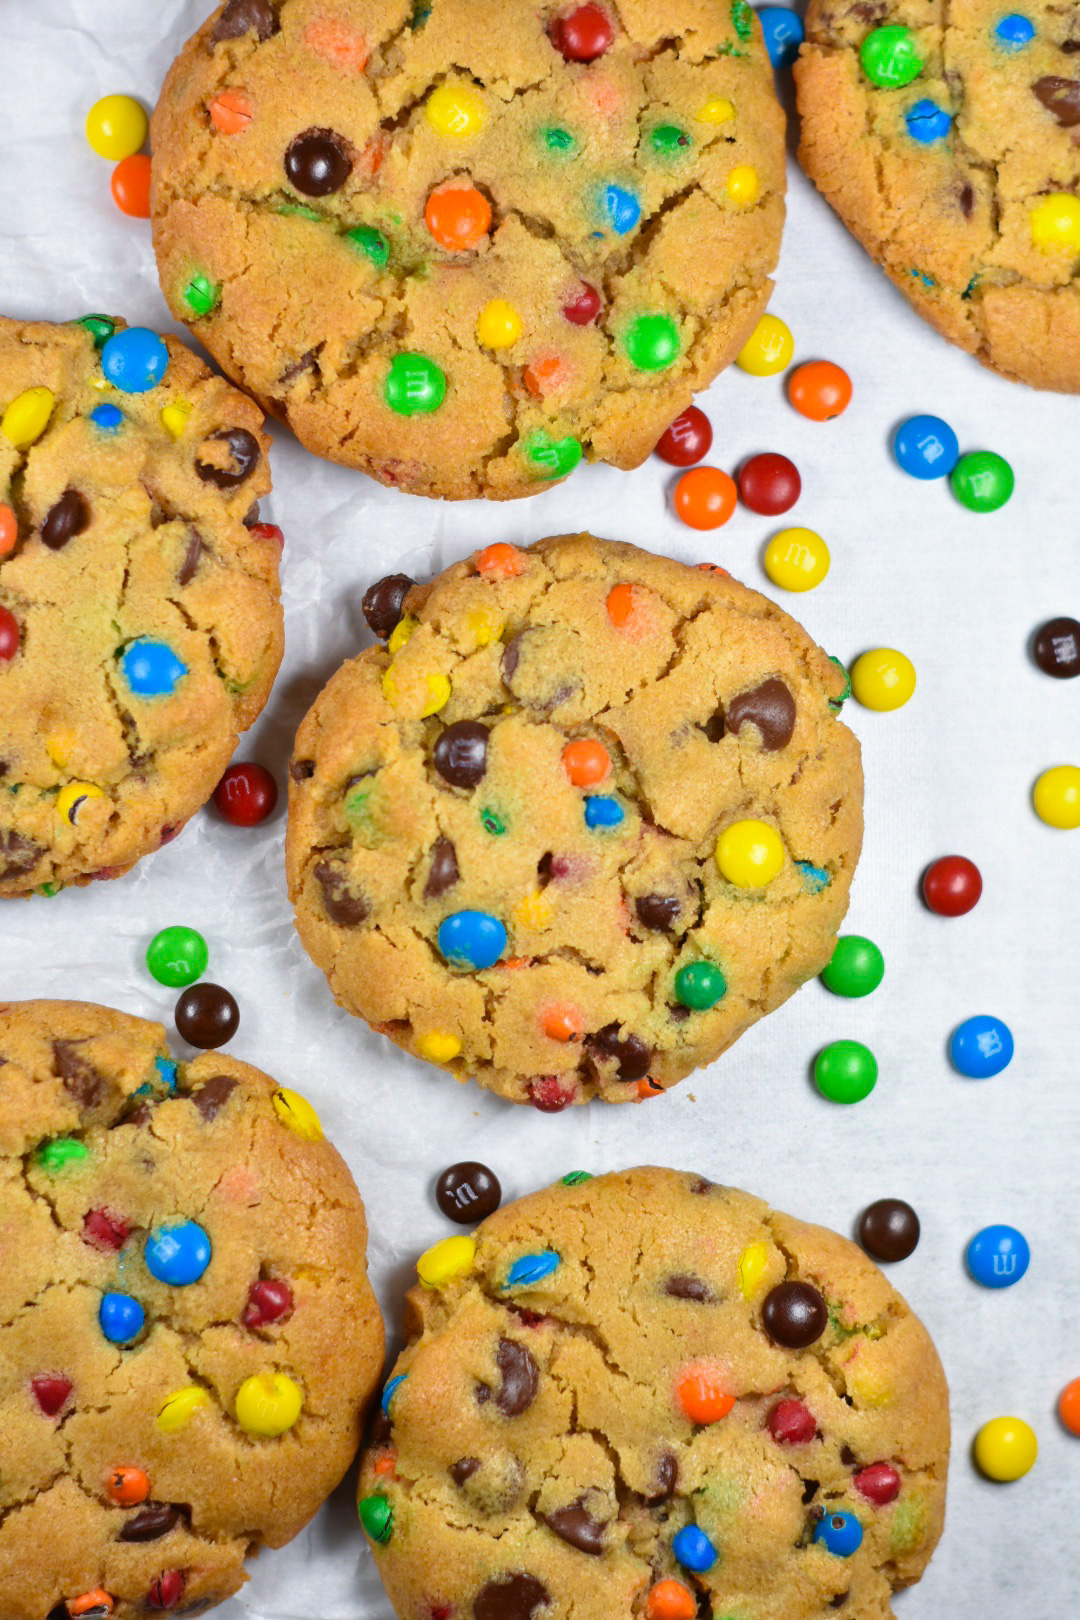 peanut butter cookies and M&Ms arranged on a white surface